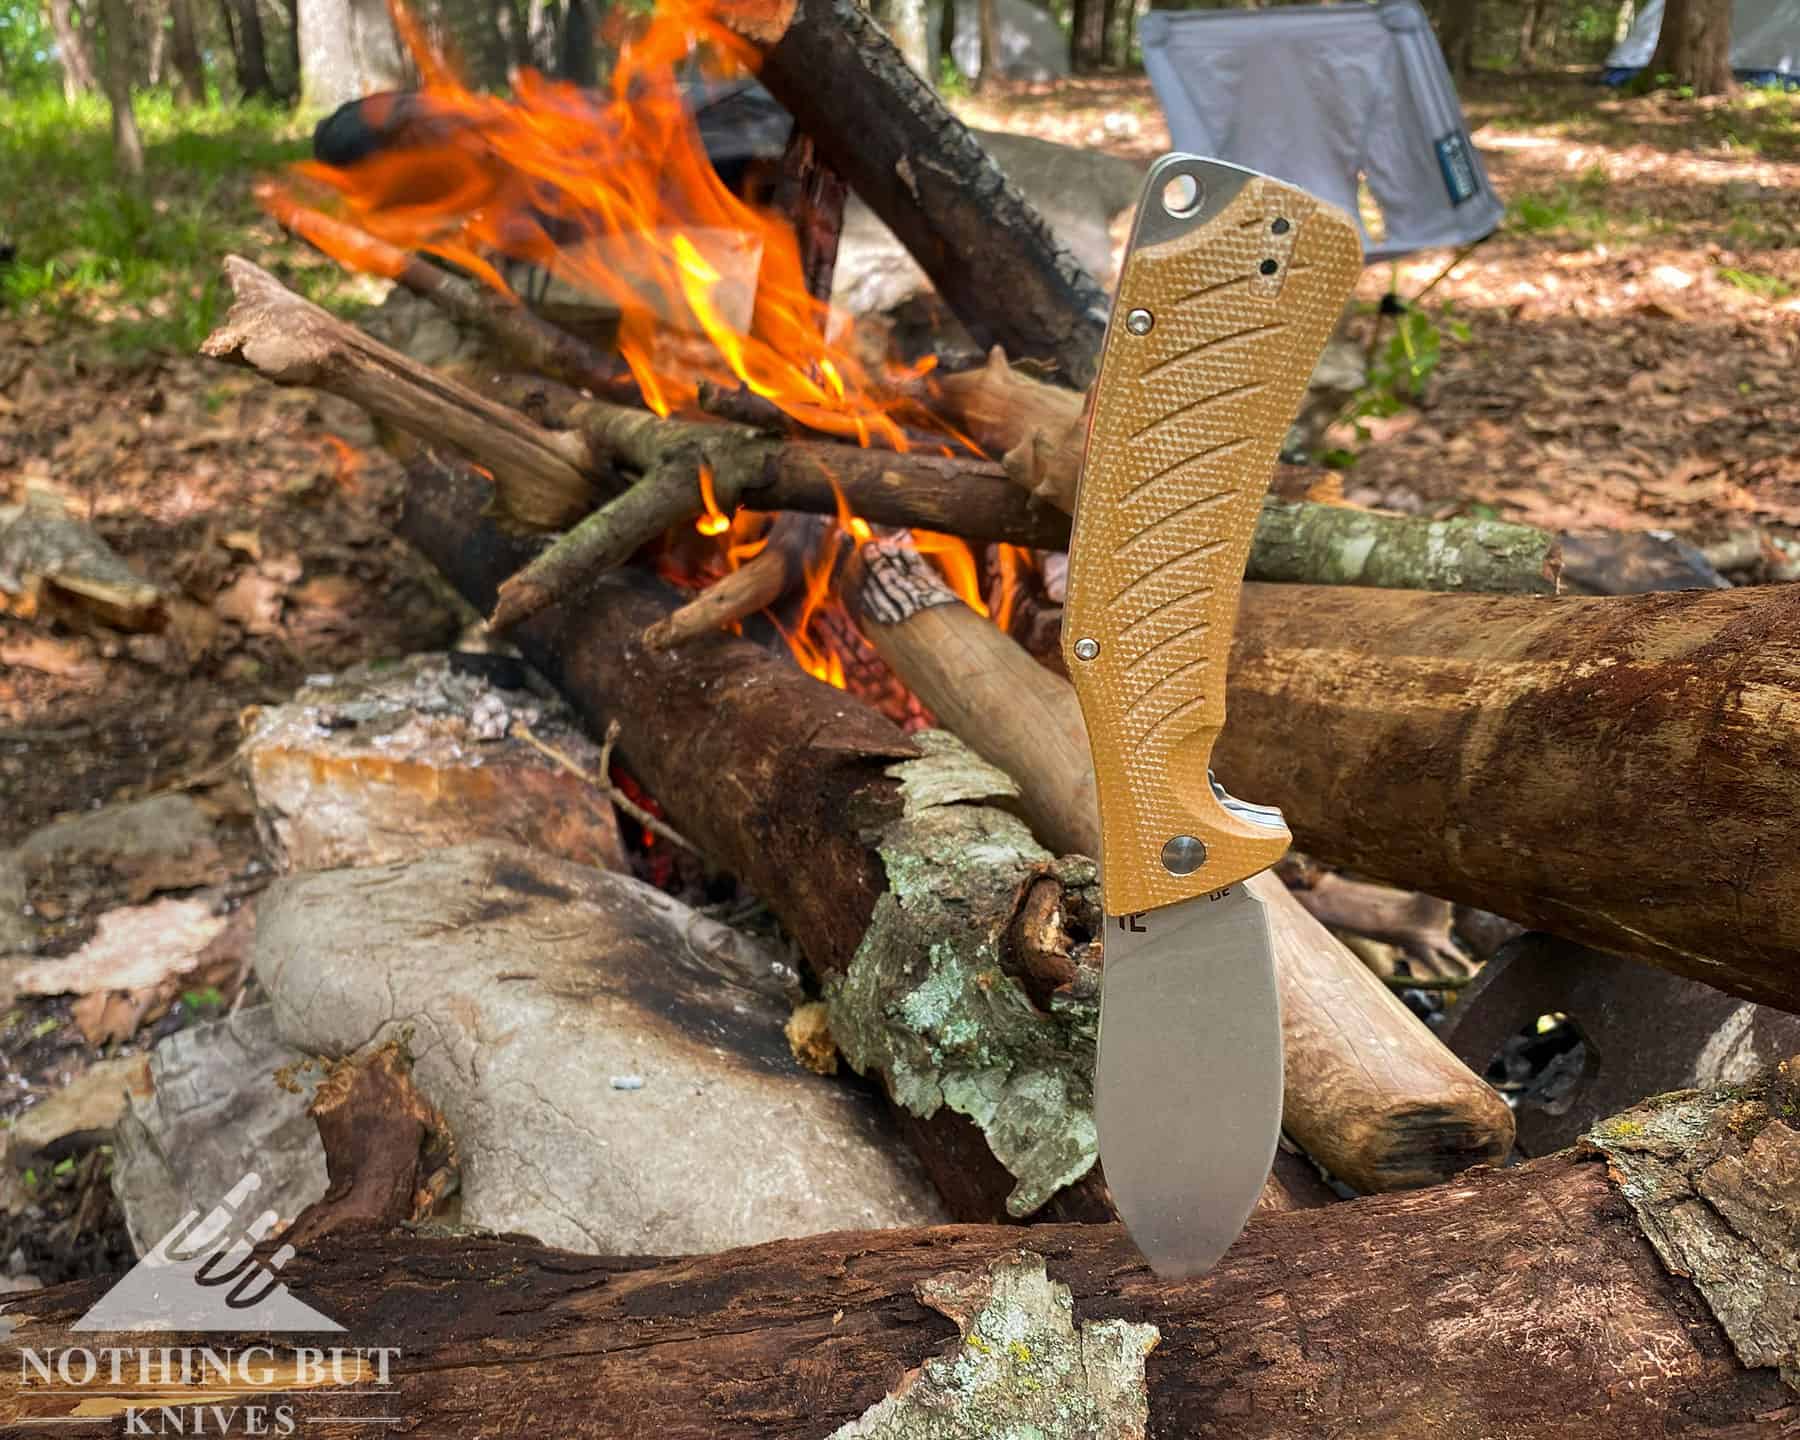 The wide leaf-shaped blade would be a solid edition to a hunting camp.